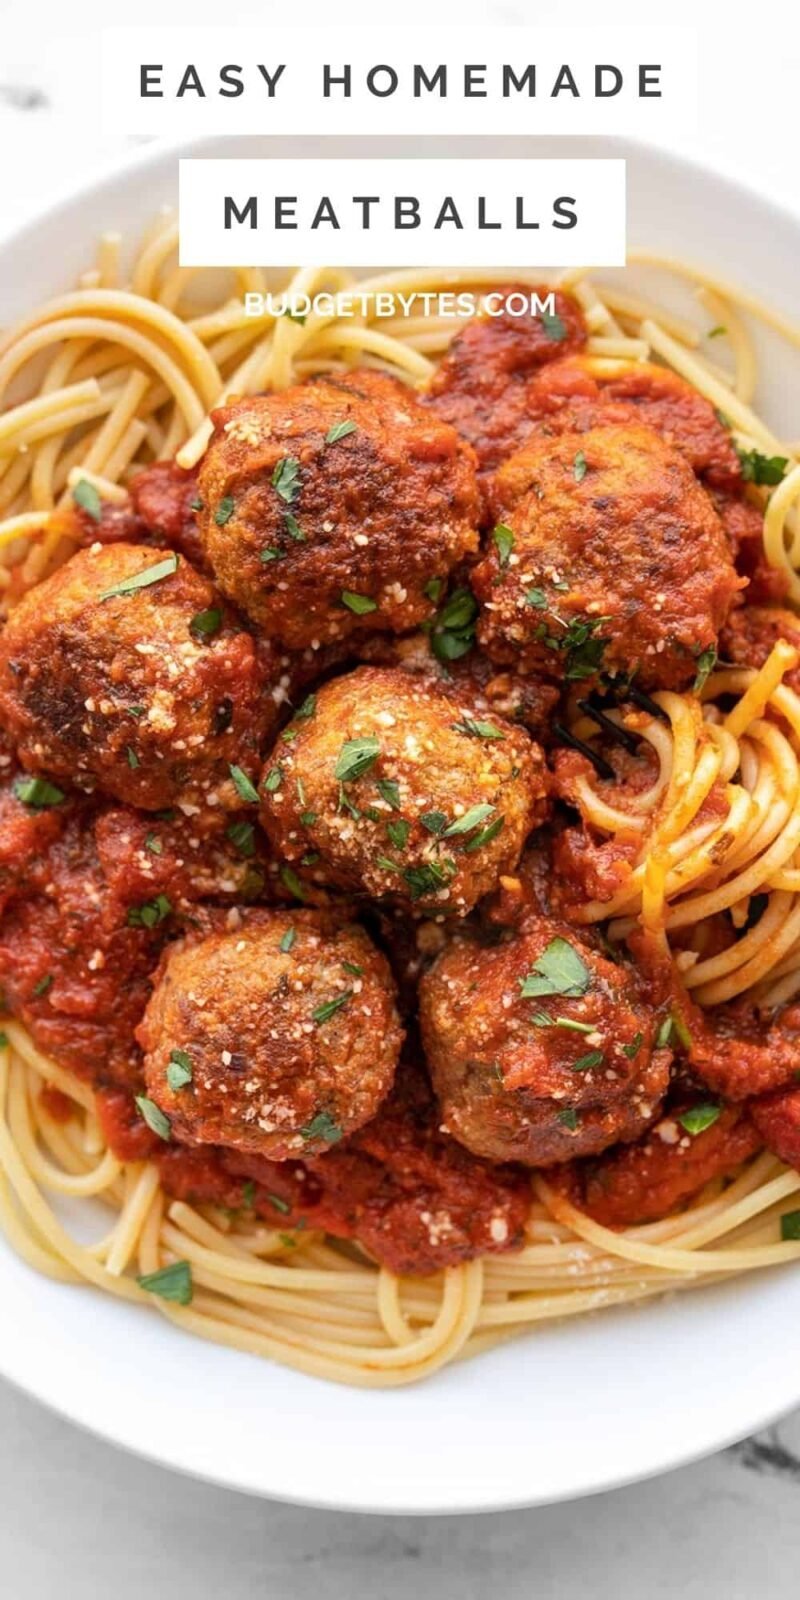 Close up of a plate of spaghetti and meatballs, title text at the top